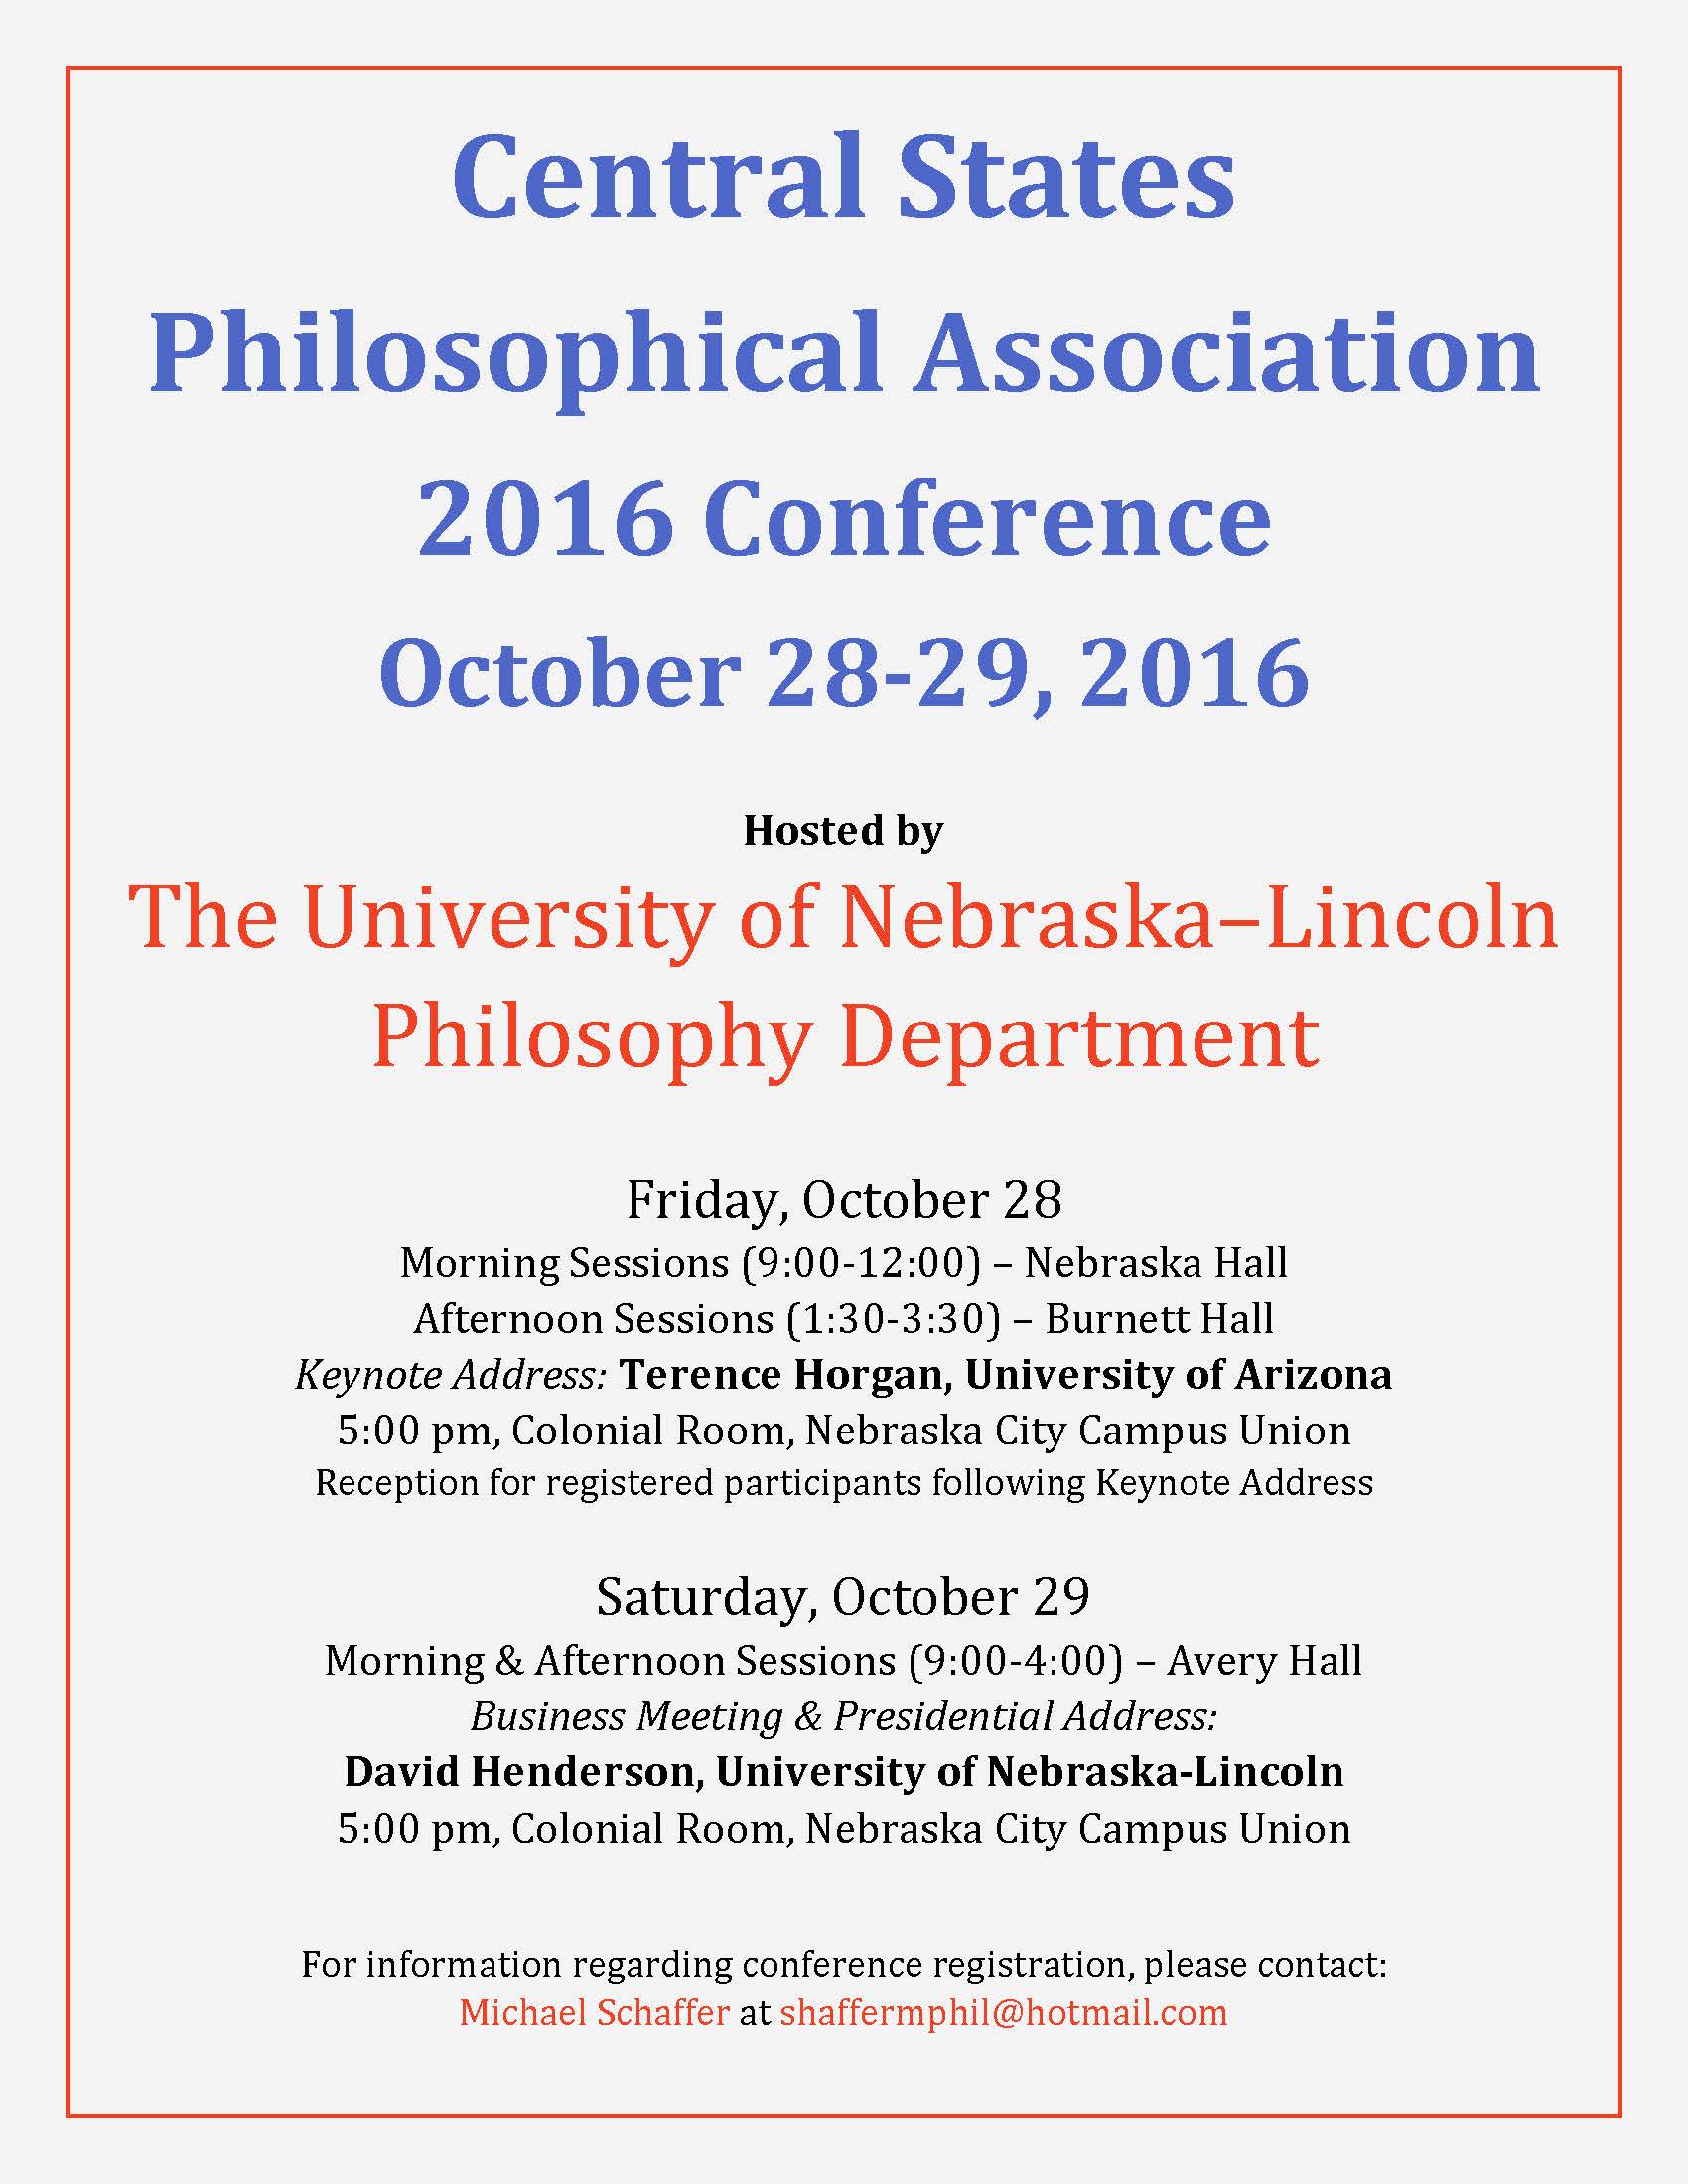 UNL Philosophy Department Hosts the Central States Philosophical Association 2016 Conference